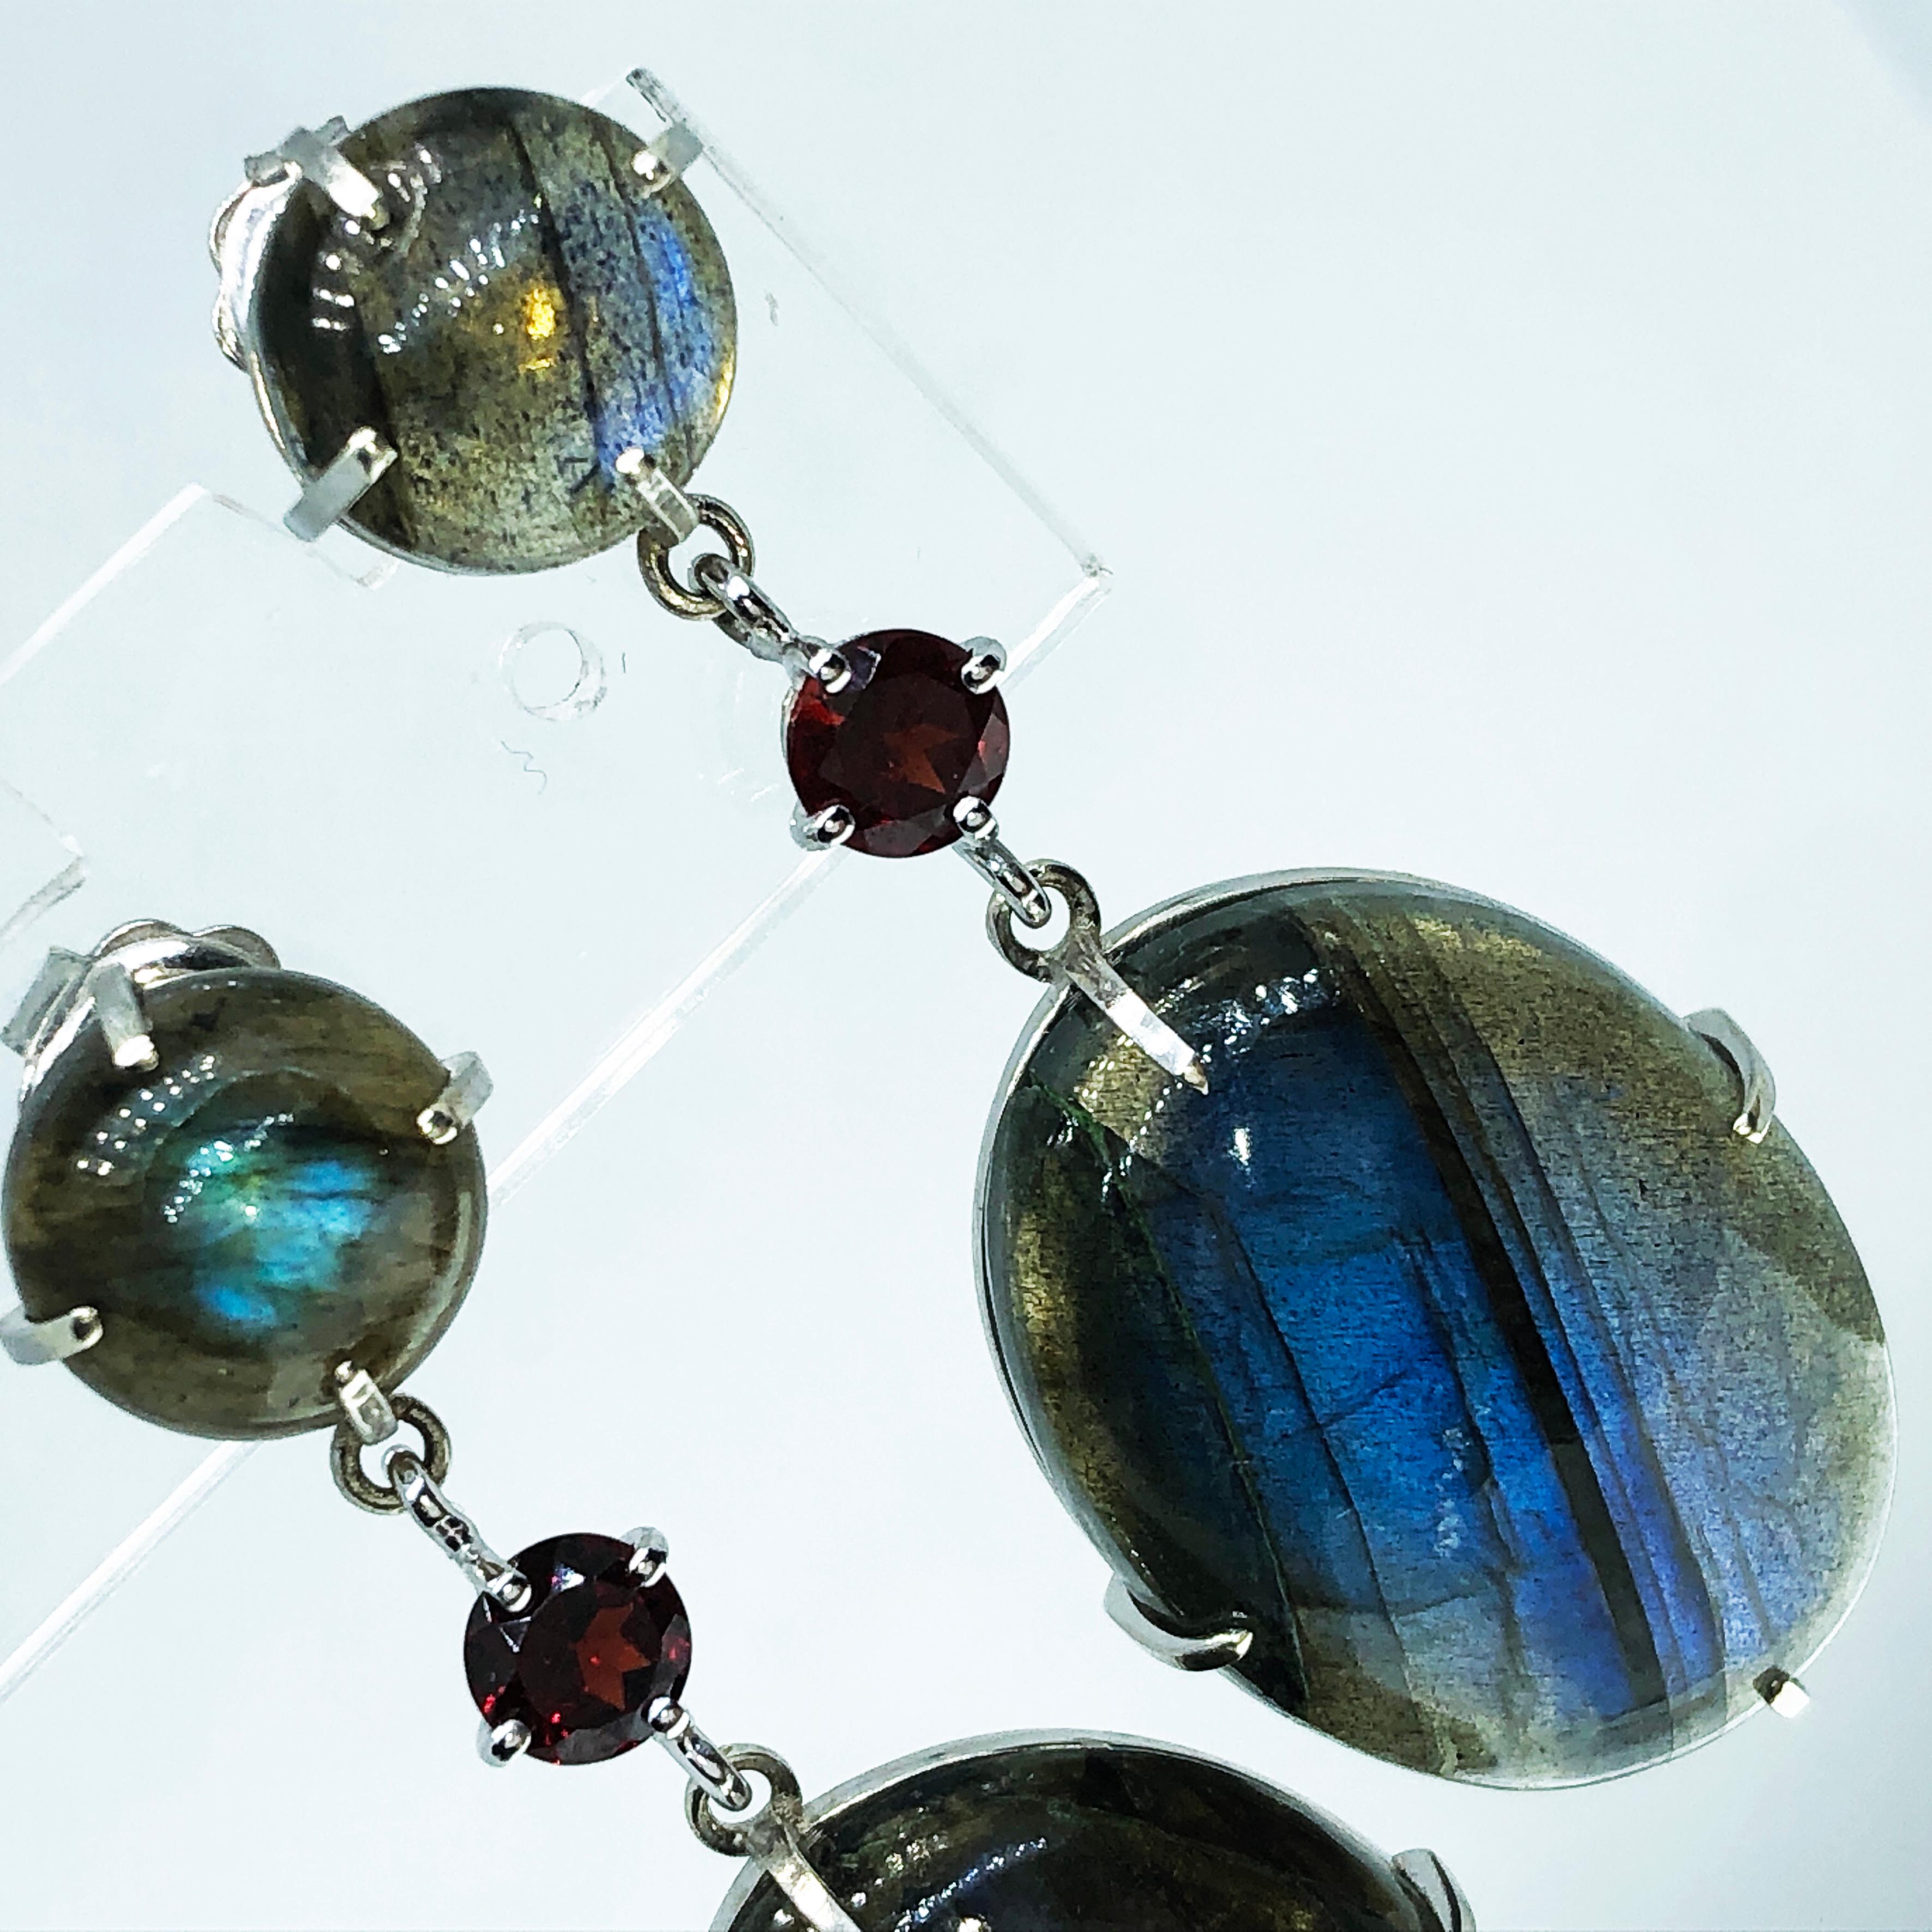 One-of-a-kind  Contemporary  Dangle Earrings Featuring 0.12Carat Round Red Garnet and 53.50 Carat Oval(0.911x0.666in) and Round Cabochon Natural Peacock-Blue Labradorite in a 9Kt White Gold  Setting.
The color-changing of the Labradorite's Cabochon